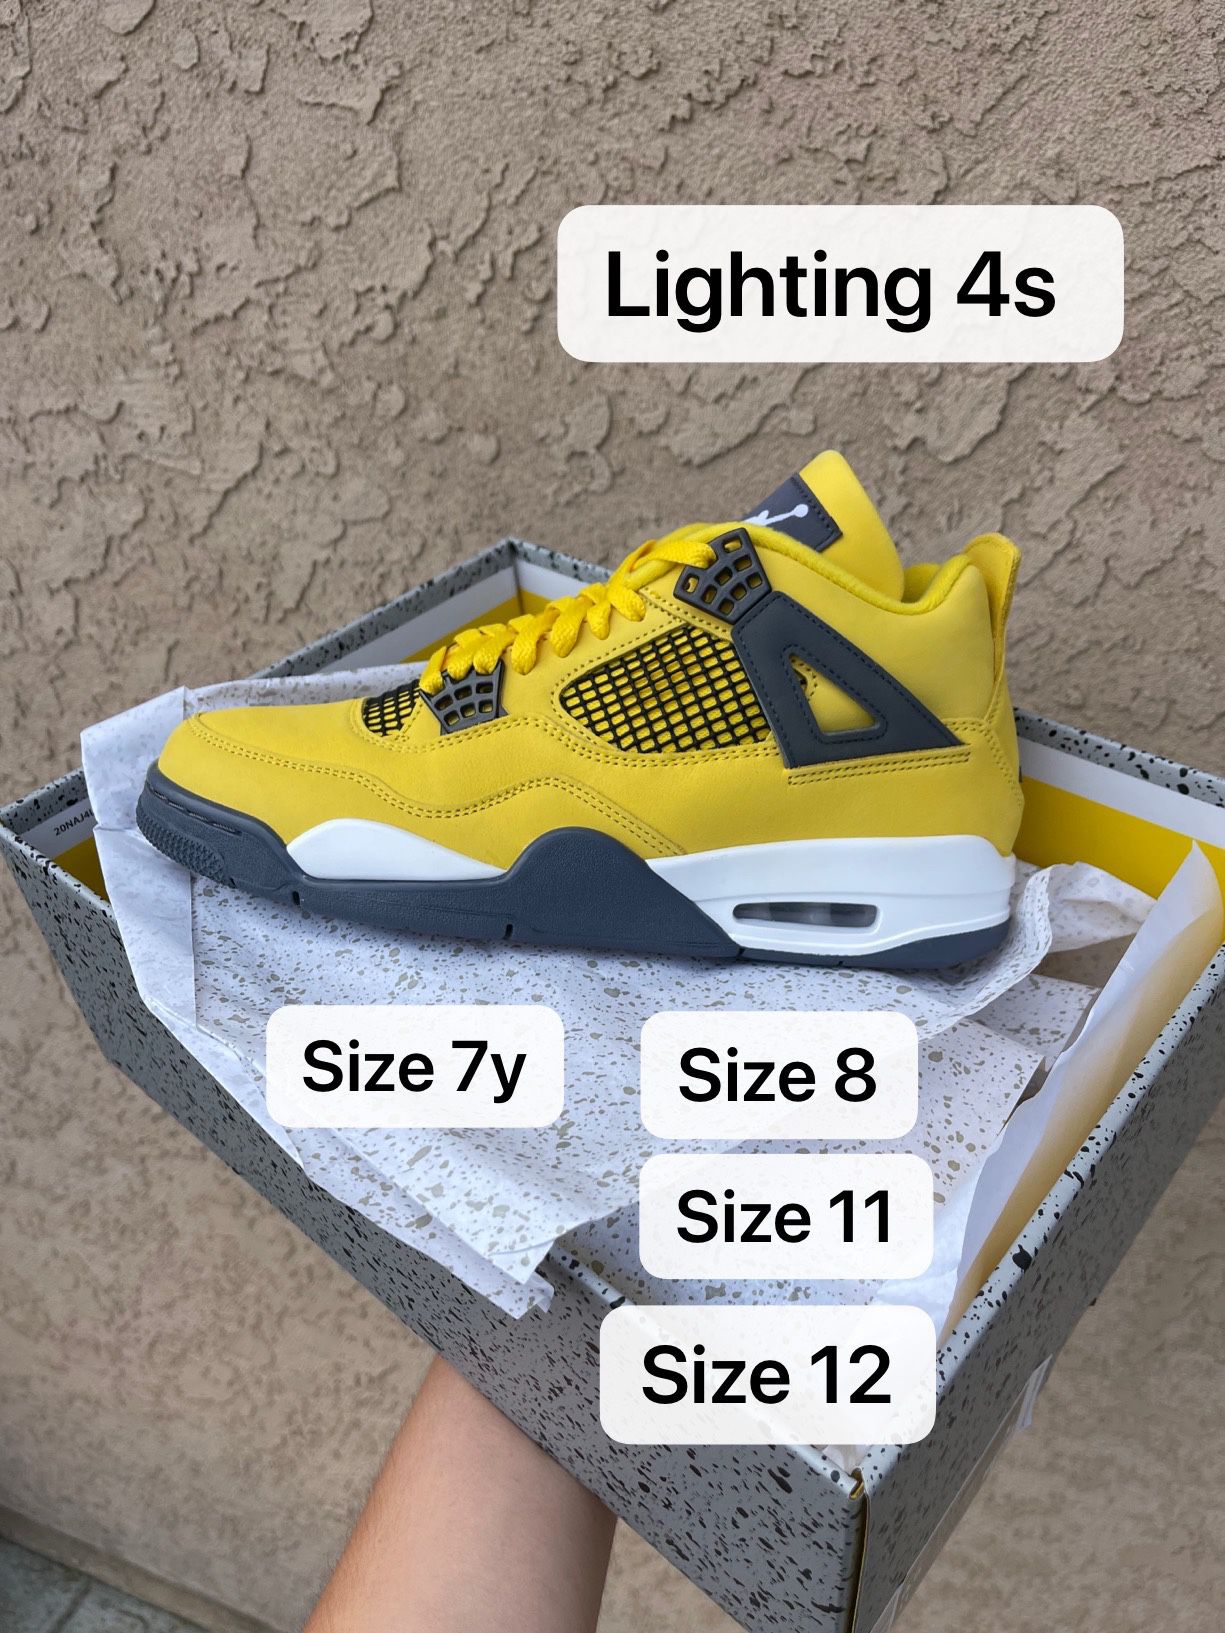 Air Jordan 4 Lightning Tour Yellow Mens Size 8 size 11 size 12 women’s size 7y size 8.5w Brand New Released Hype Sneakers